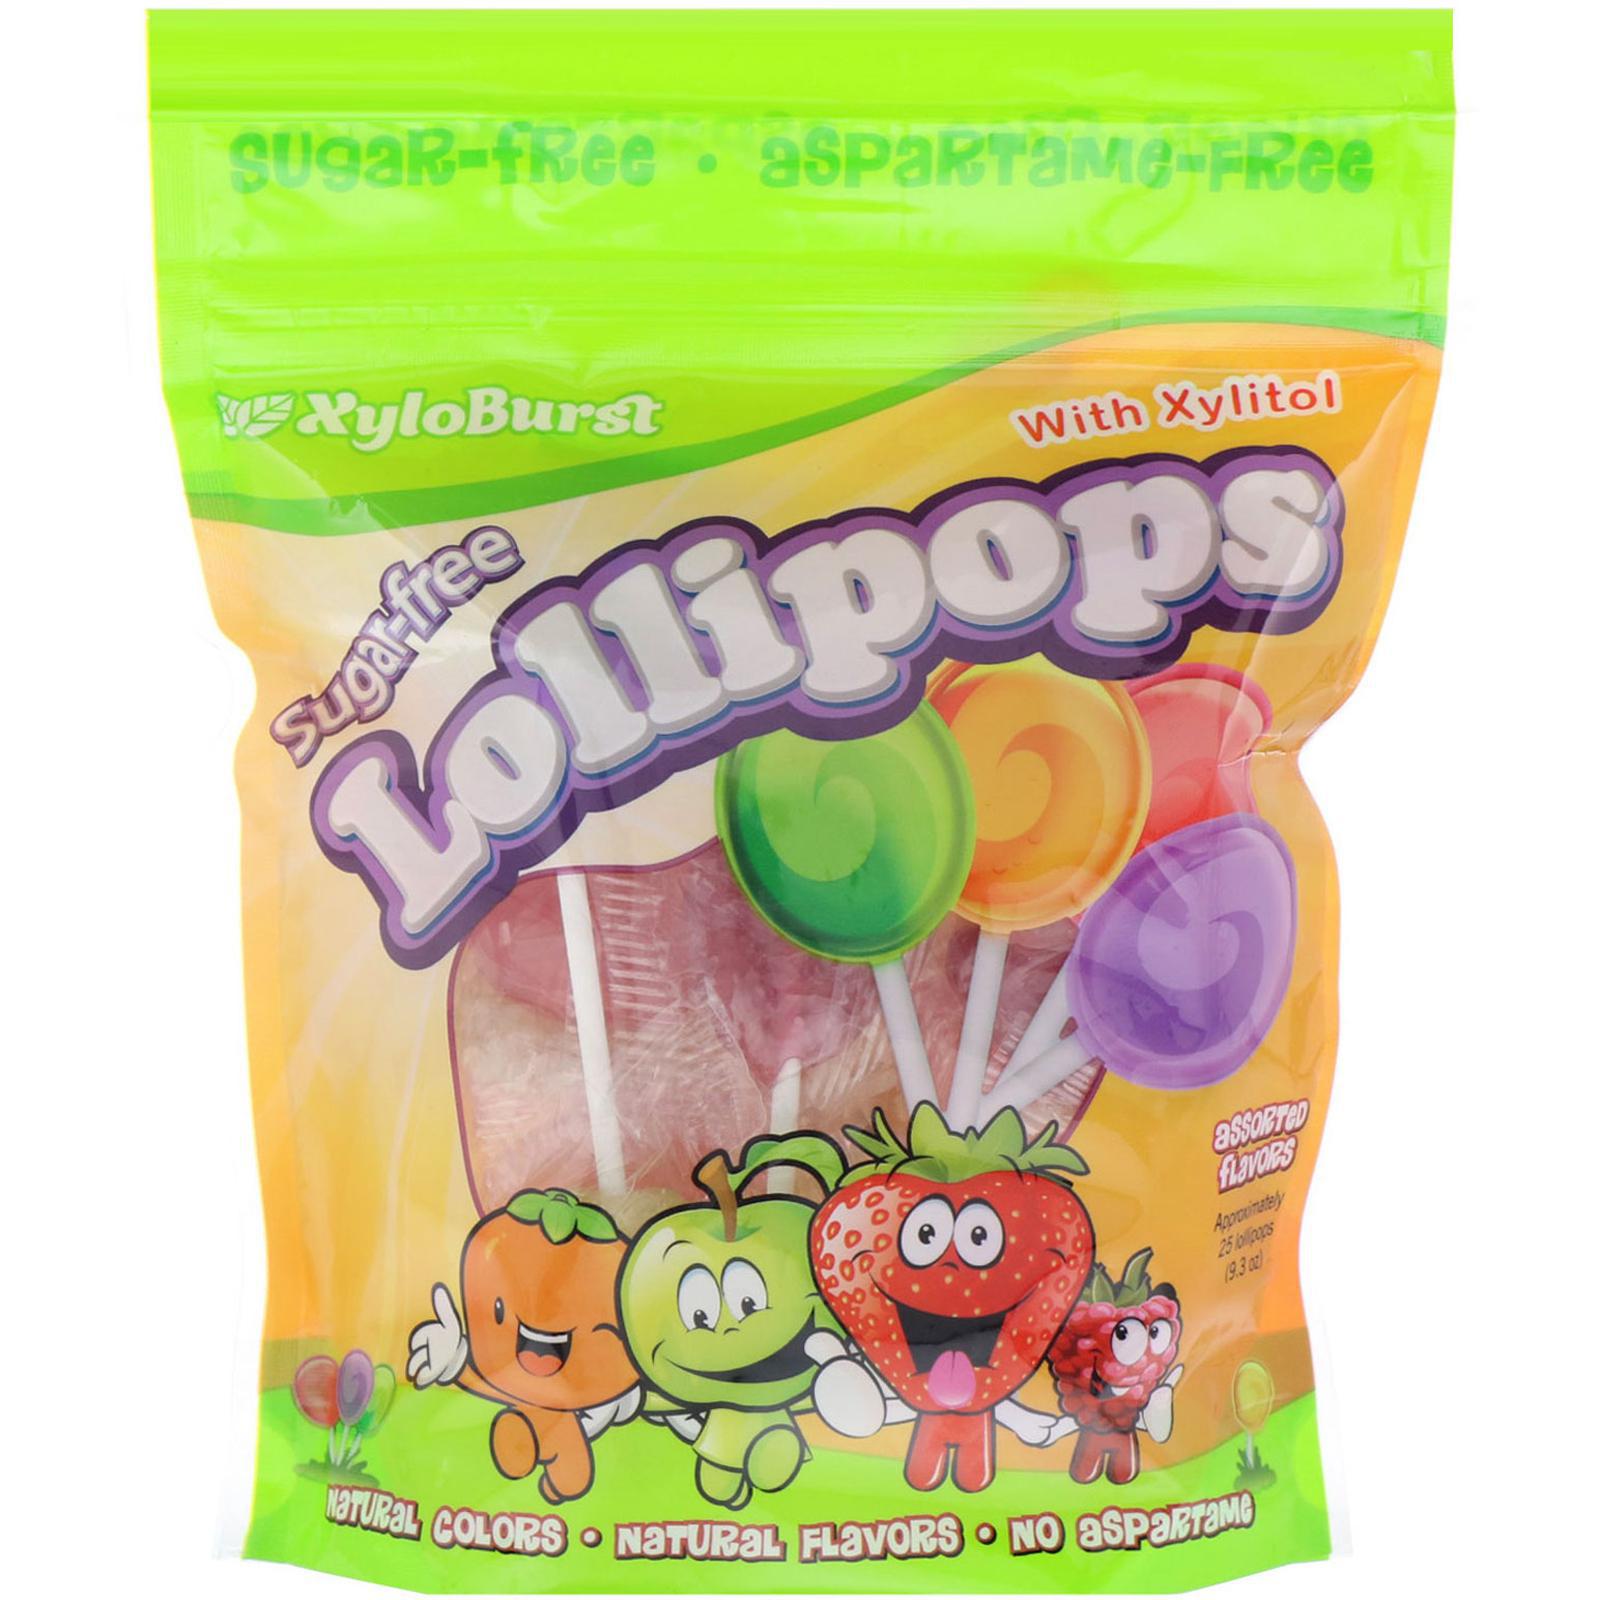 Xyloburst Sugar Free Lollipops with Xylitol - 25 Lollipops